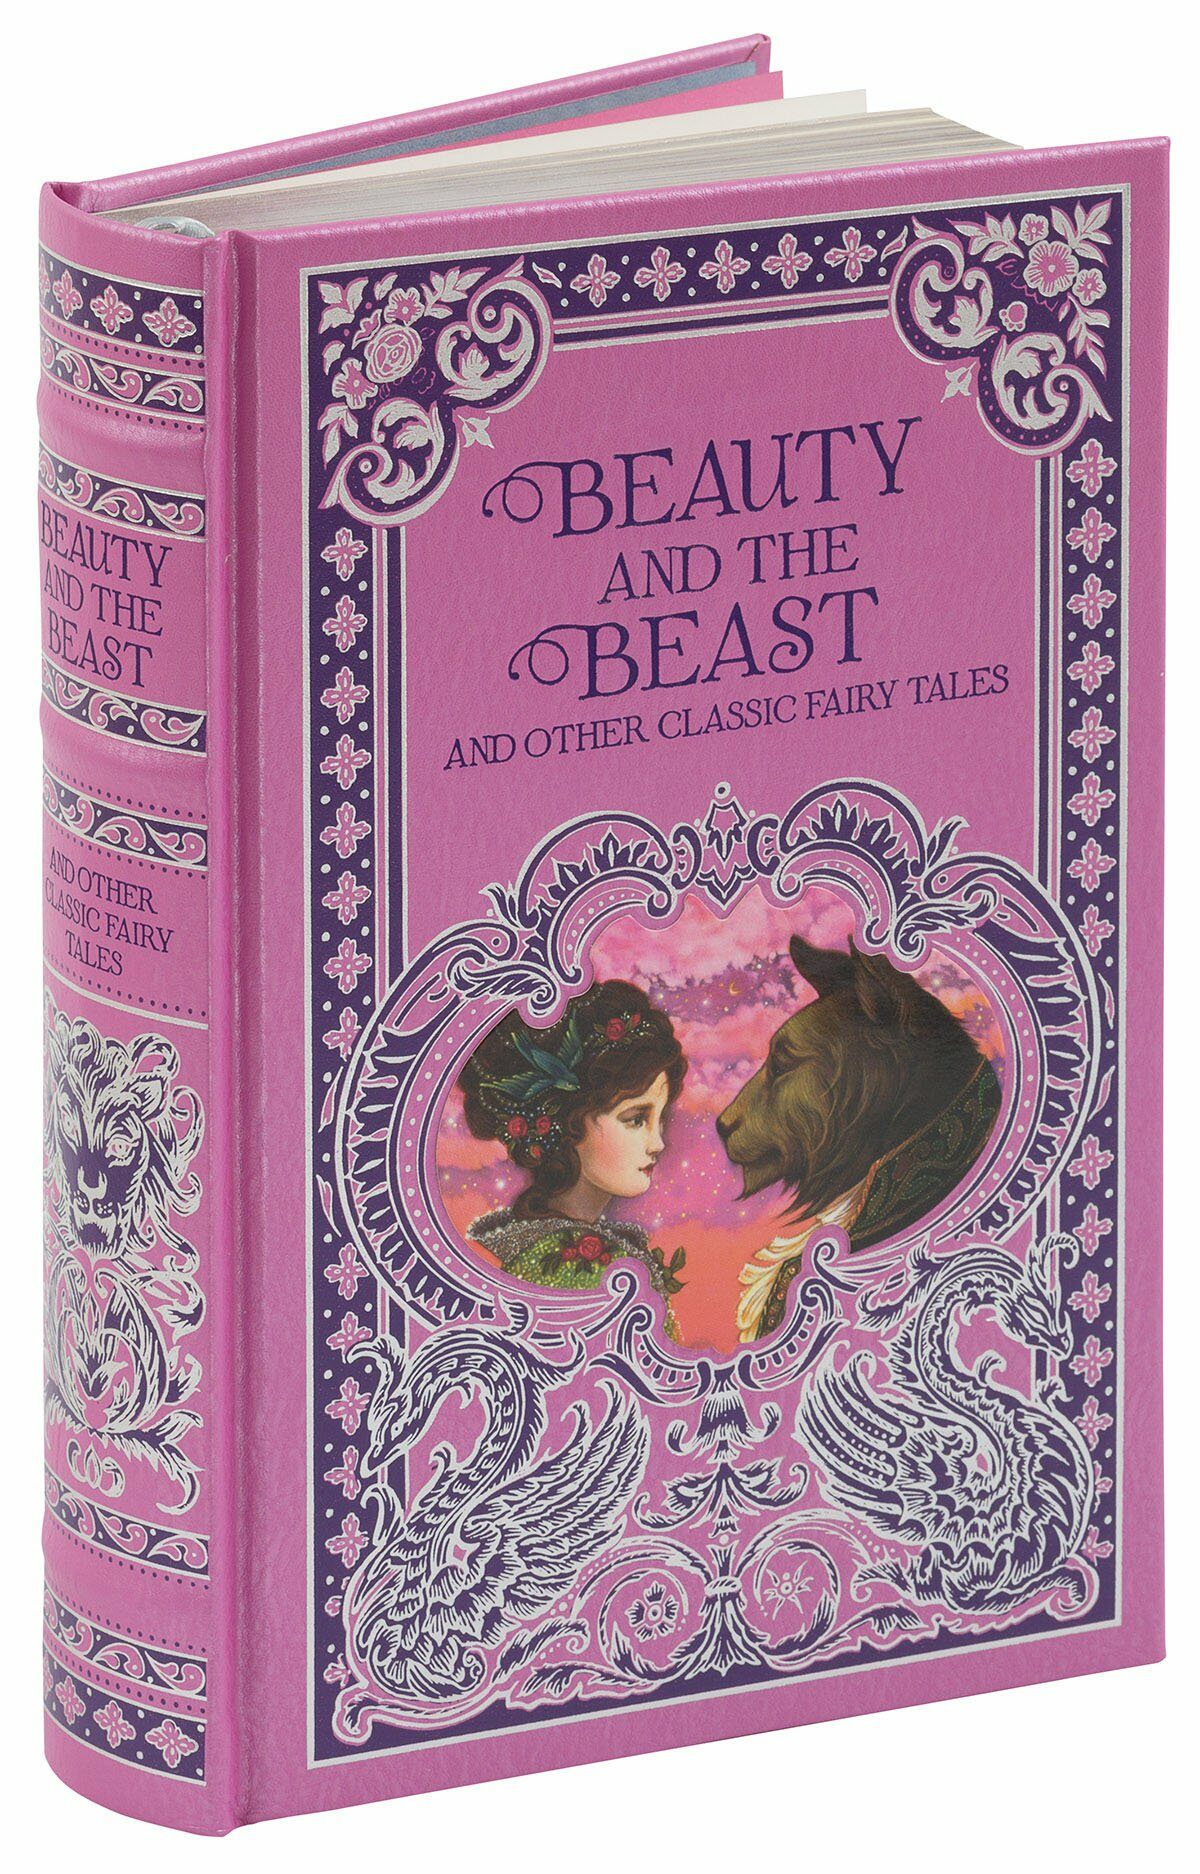 Beauty and the Beast and Other Classic Fairy Tales (Hardcover)